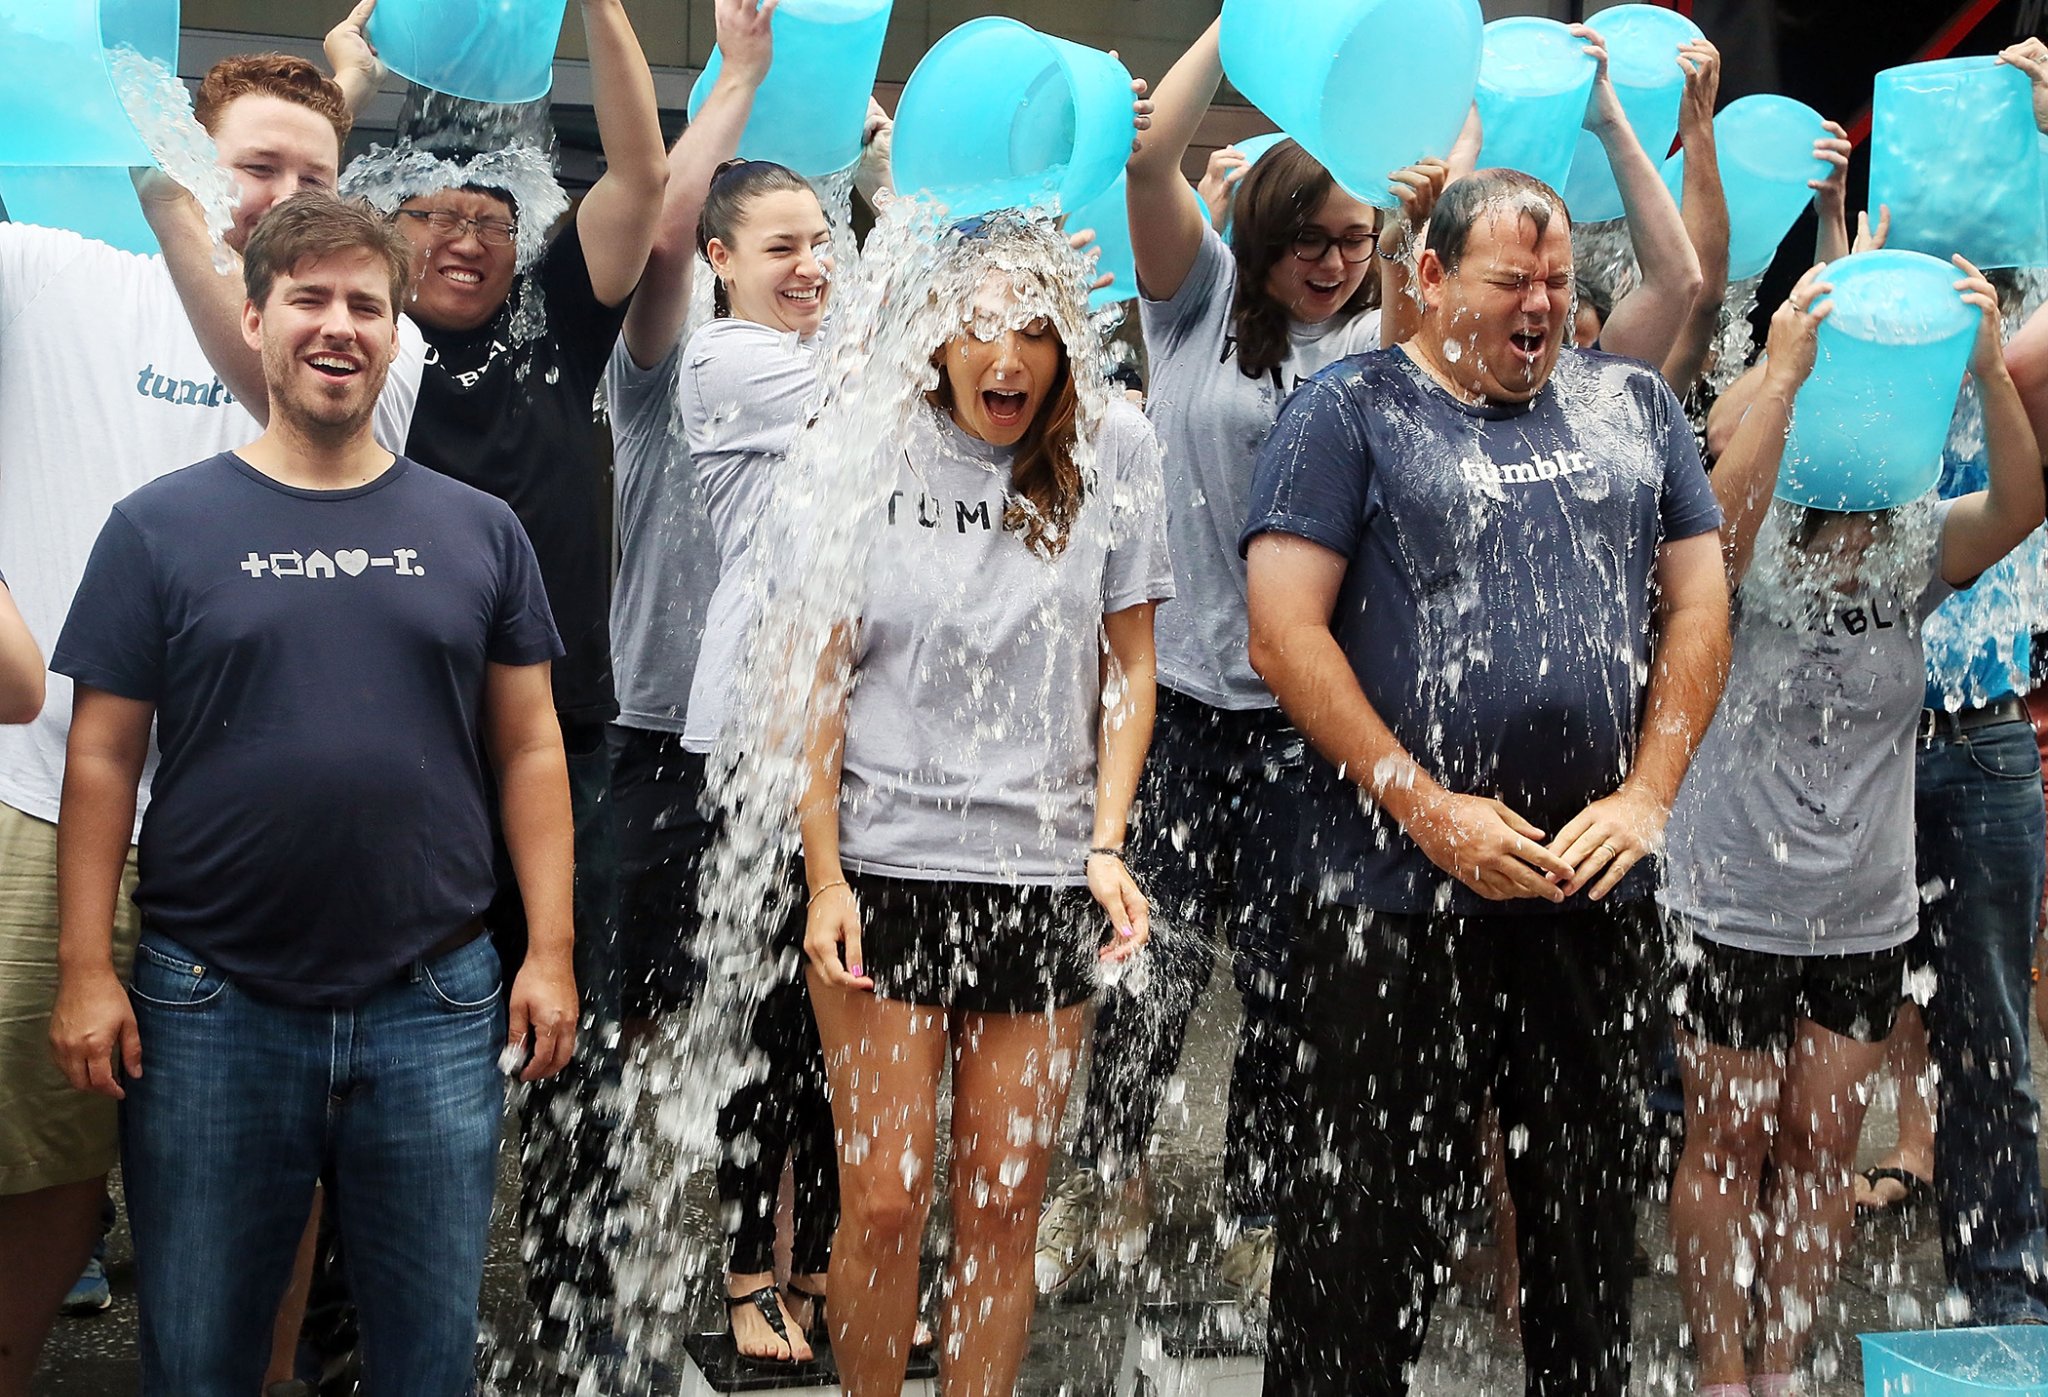 What Happened to the Money Raised From the Ice Bucket Challenge